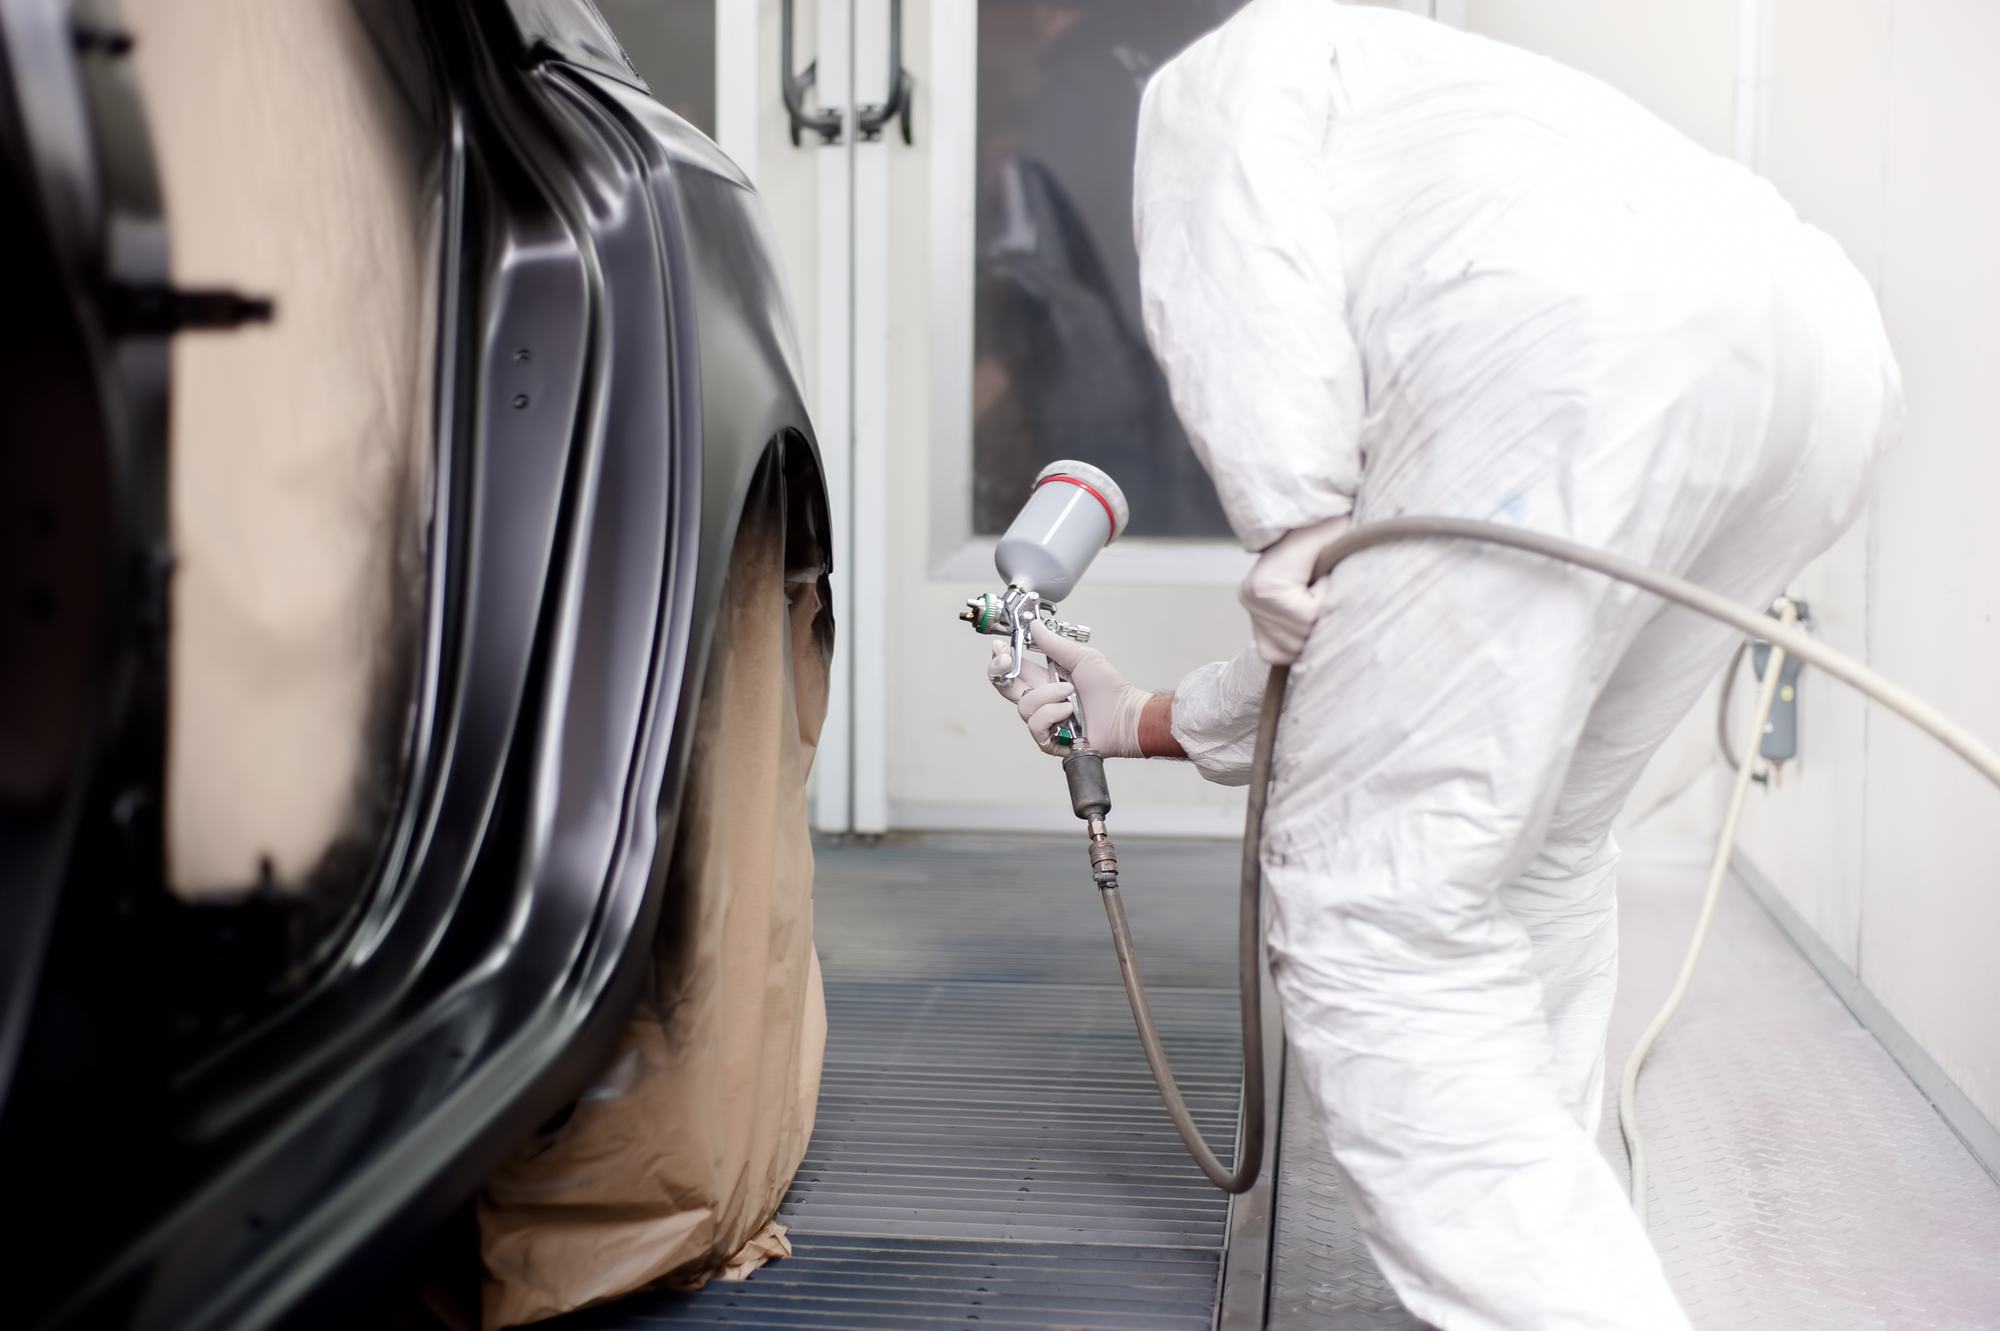 Vehicle engineer working and spraying black paint on a car in auto body shop